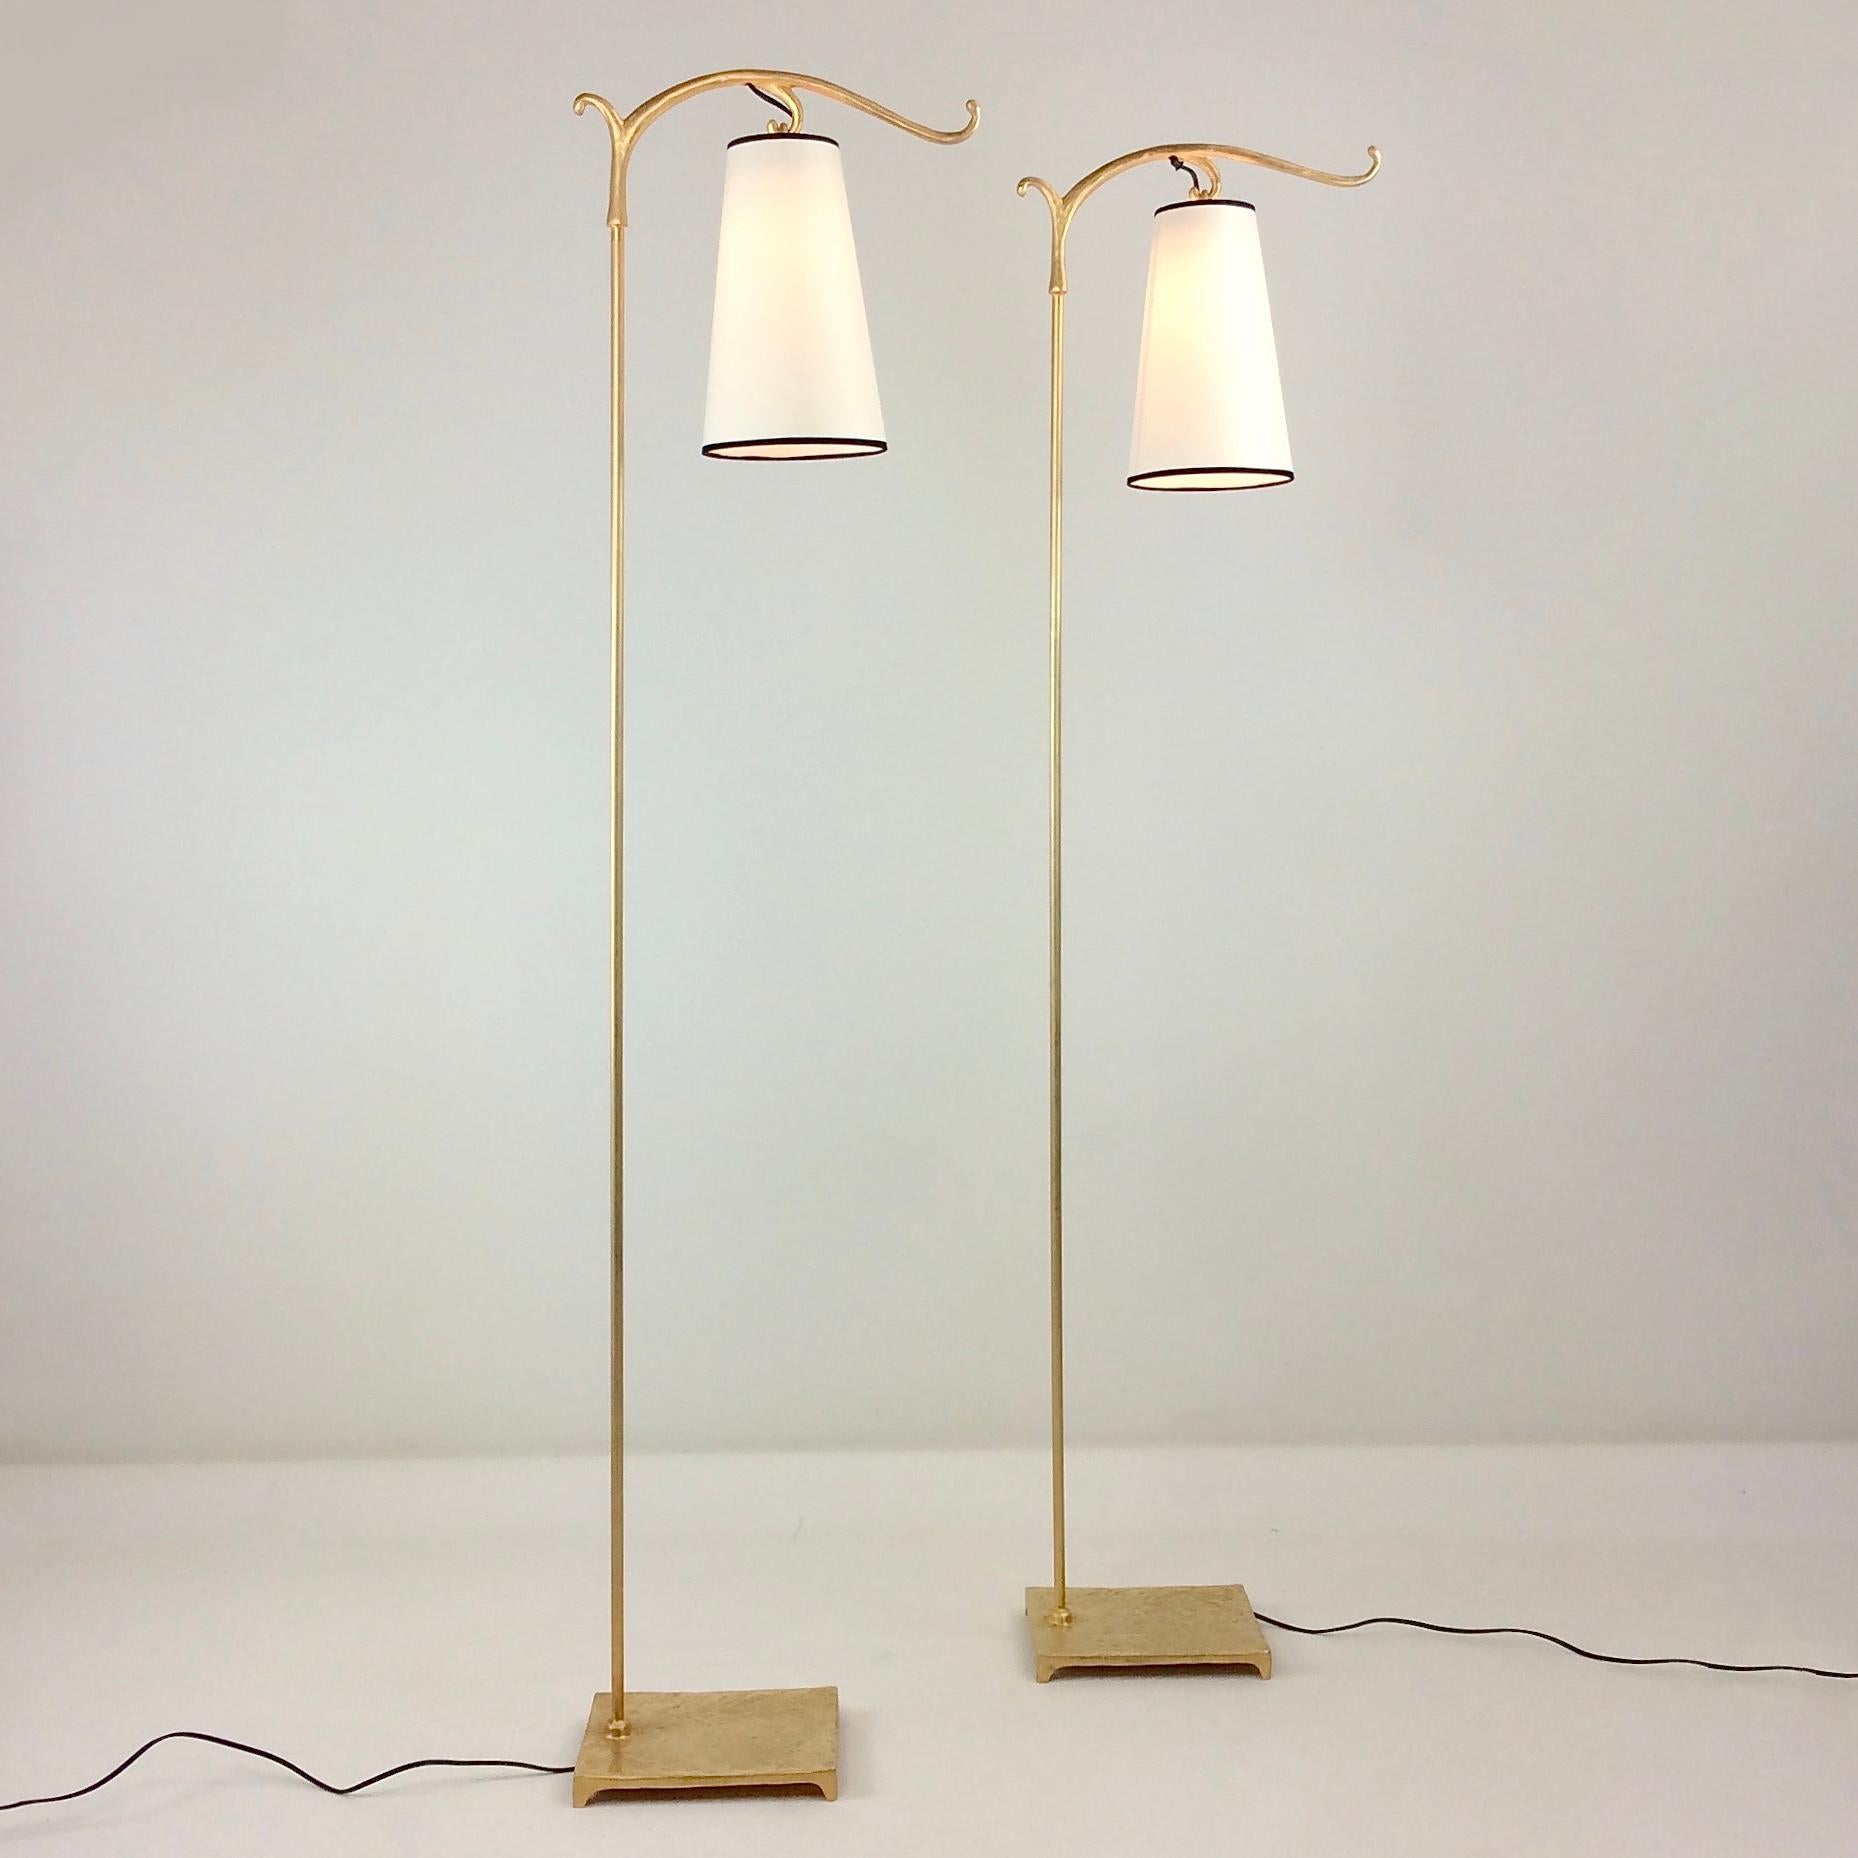 Late 20th Century Pair of Gilt Metal Floor Lamps, circa 1980, France.